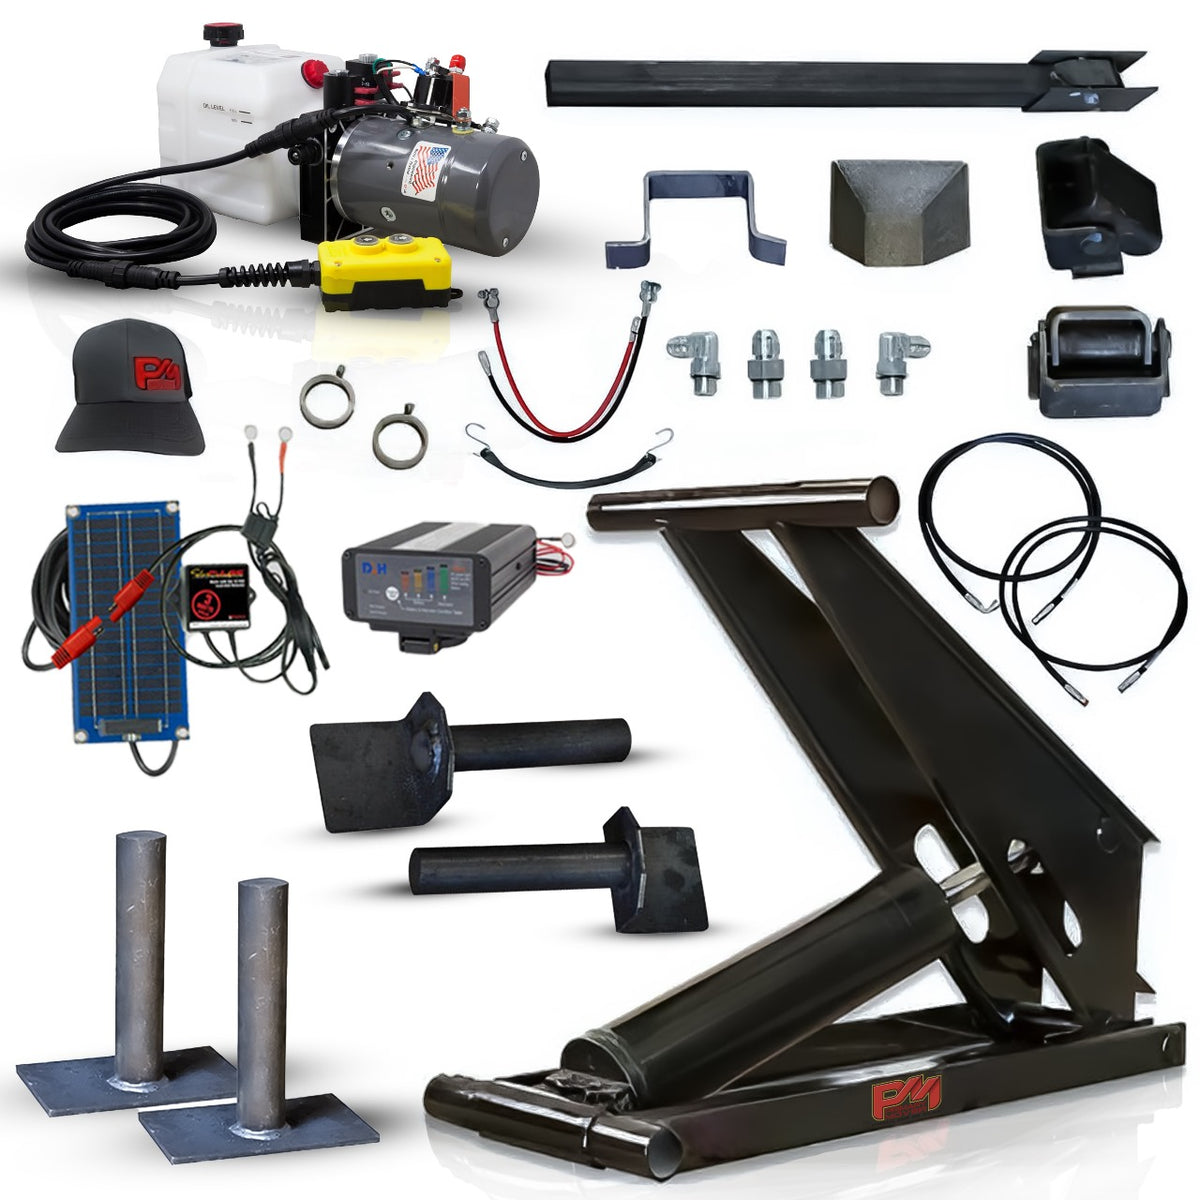 Hydraulic Scissor Hoist Kit - 10 Ton Capacity - Fits 12-16' Dump Body | PF-520: A collage of equipment including a black machine, a black box with colorful buttons, a solar panel, and metal poles.